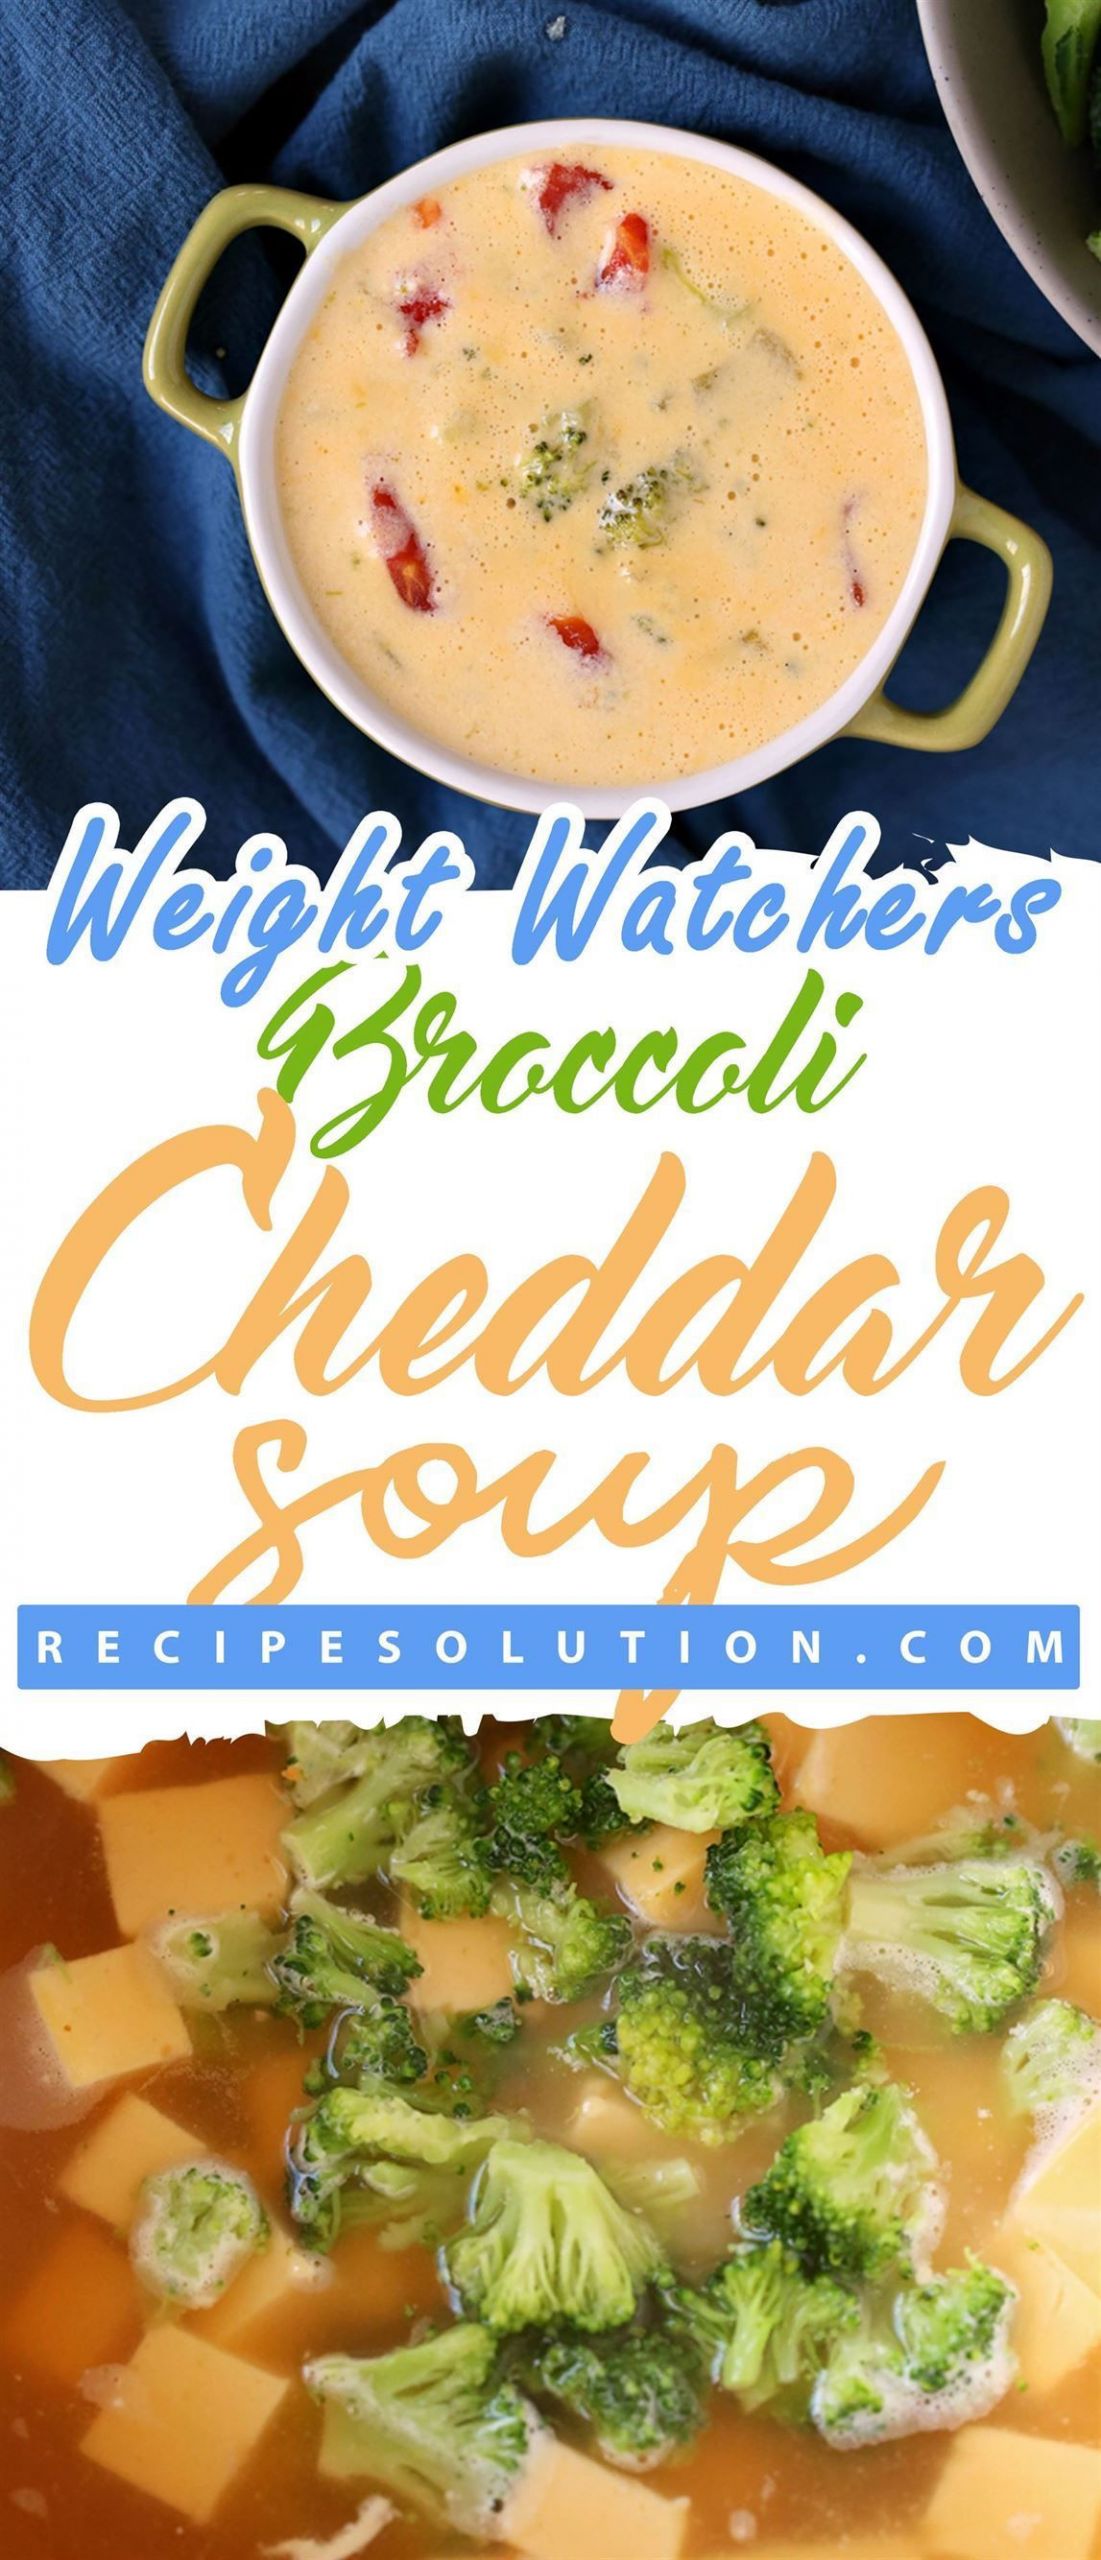 Weight Watcher Broccoli Cheese Soup
 Pin on weight watchers recipes